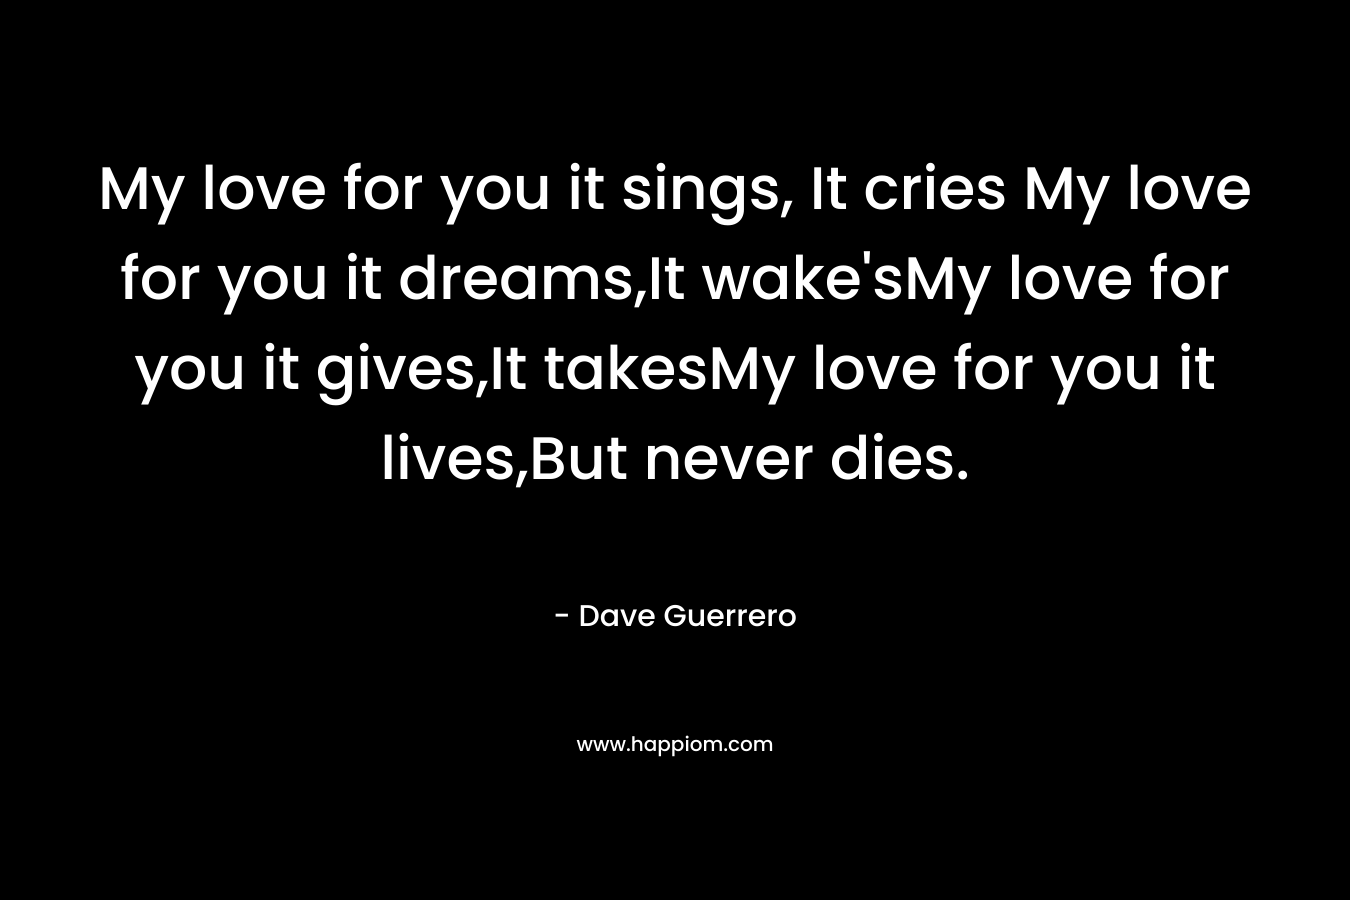 My love for you it sings, It cries My love for you it dreams,It wake’sMy love for you it gives,It takesMy love for you it lives,But never dies. – Dave Guerrero